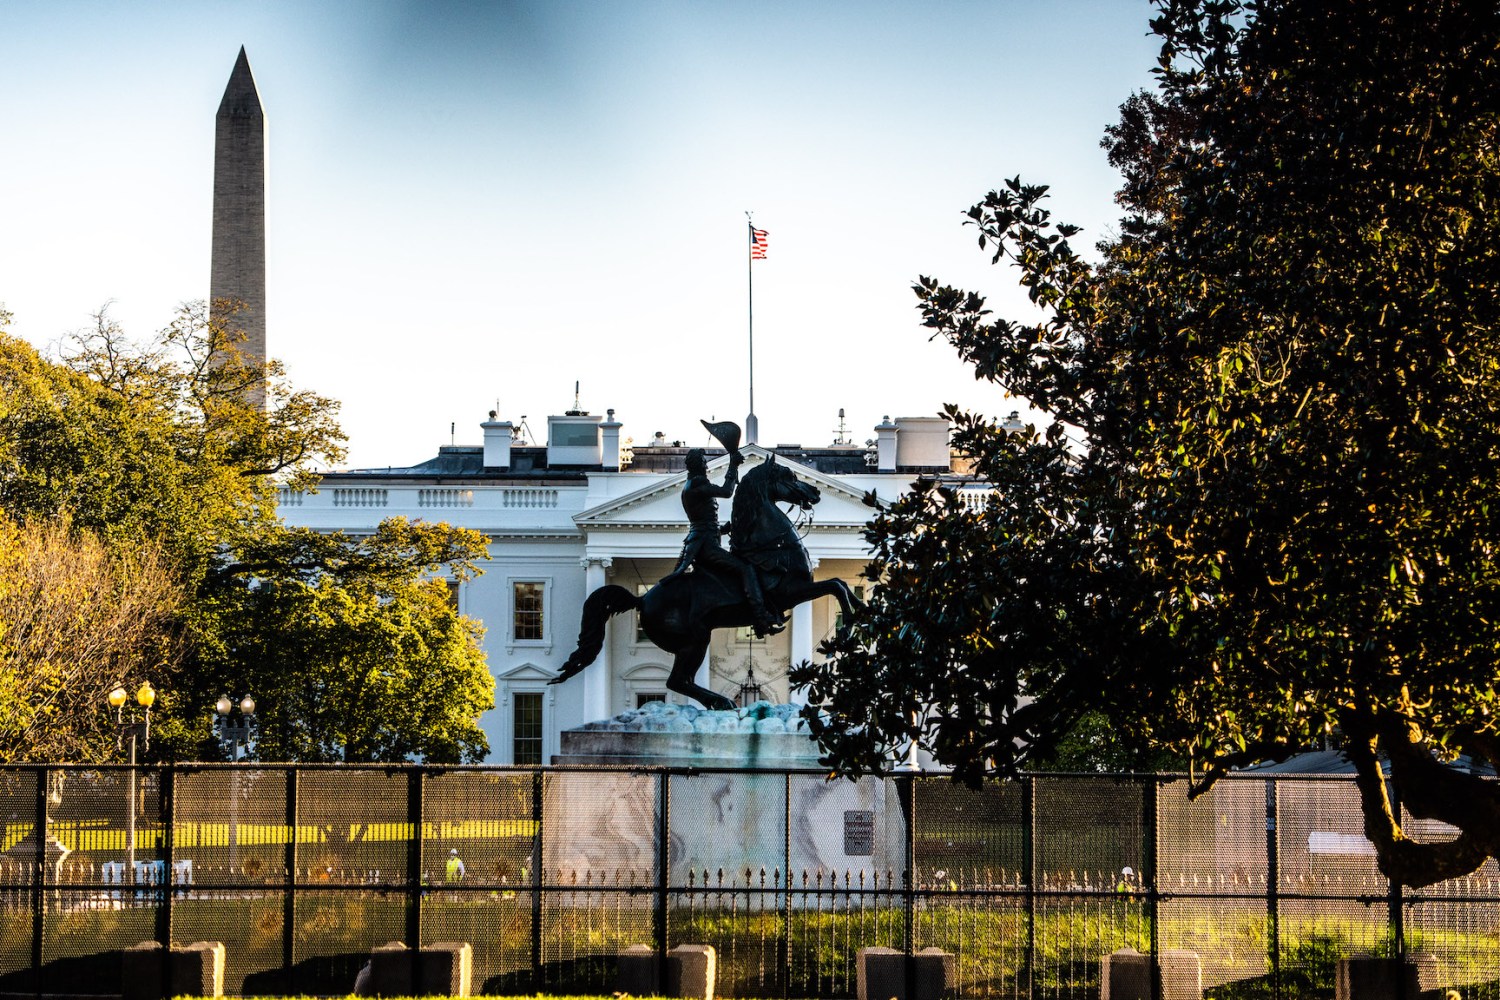 WASHINGTON D.C. NOVEMBER 4- A view of the White House from Black Lives Matter Plaza on November 4, 2020 in Washington D.C. on Election Day. Photo: Chris Tuite/ImageSPACE/Sipa USANo Use UK. No Use Germany.